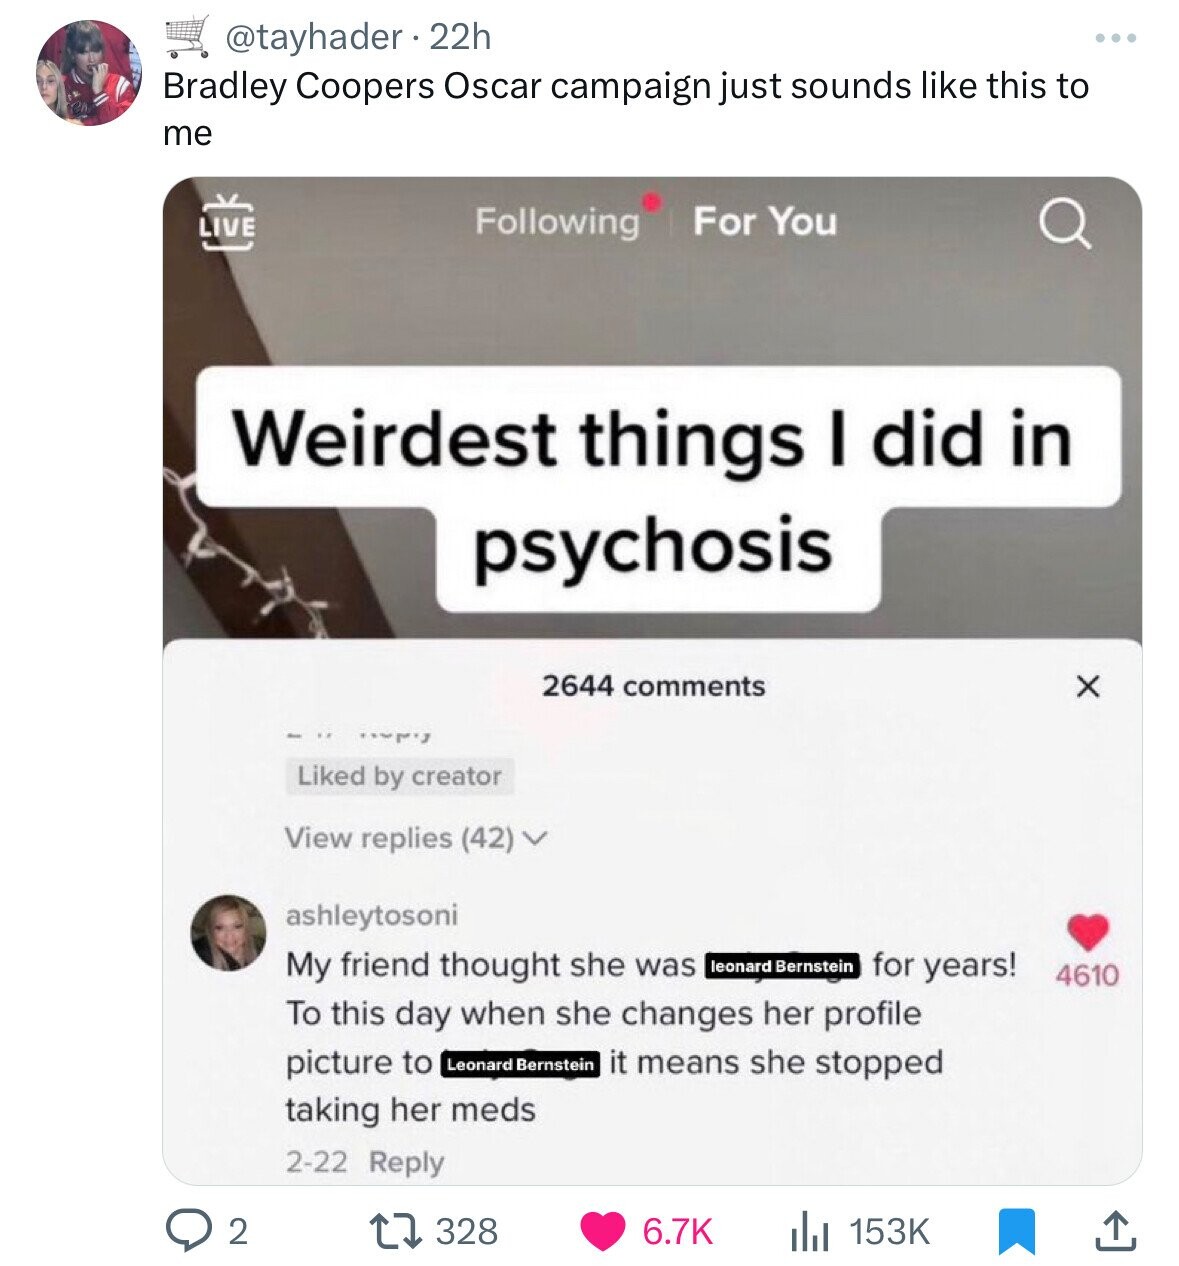 my friend thought she was lady gaga her profile picture to lady gaga it means she stopped taking her meds - 22h Bradley Coopers Oscar campaign just sounds this to me Live Weirdest things I did in psychosis 92 ing For You 777 d by creator View replies 42 2